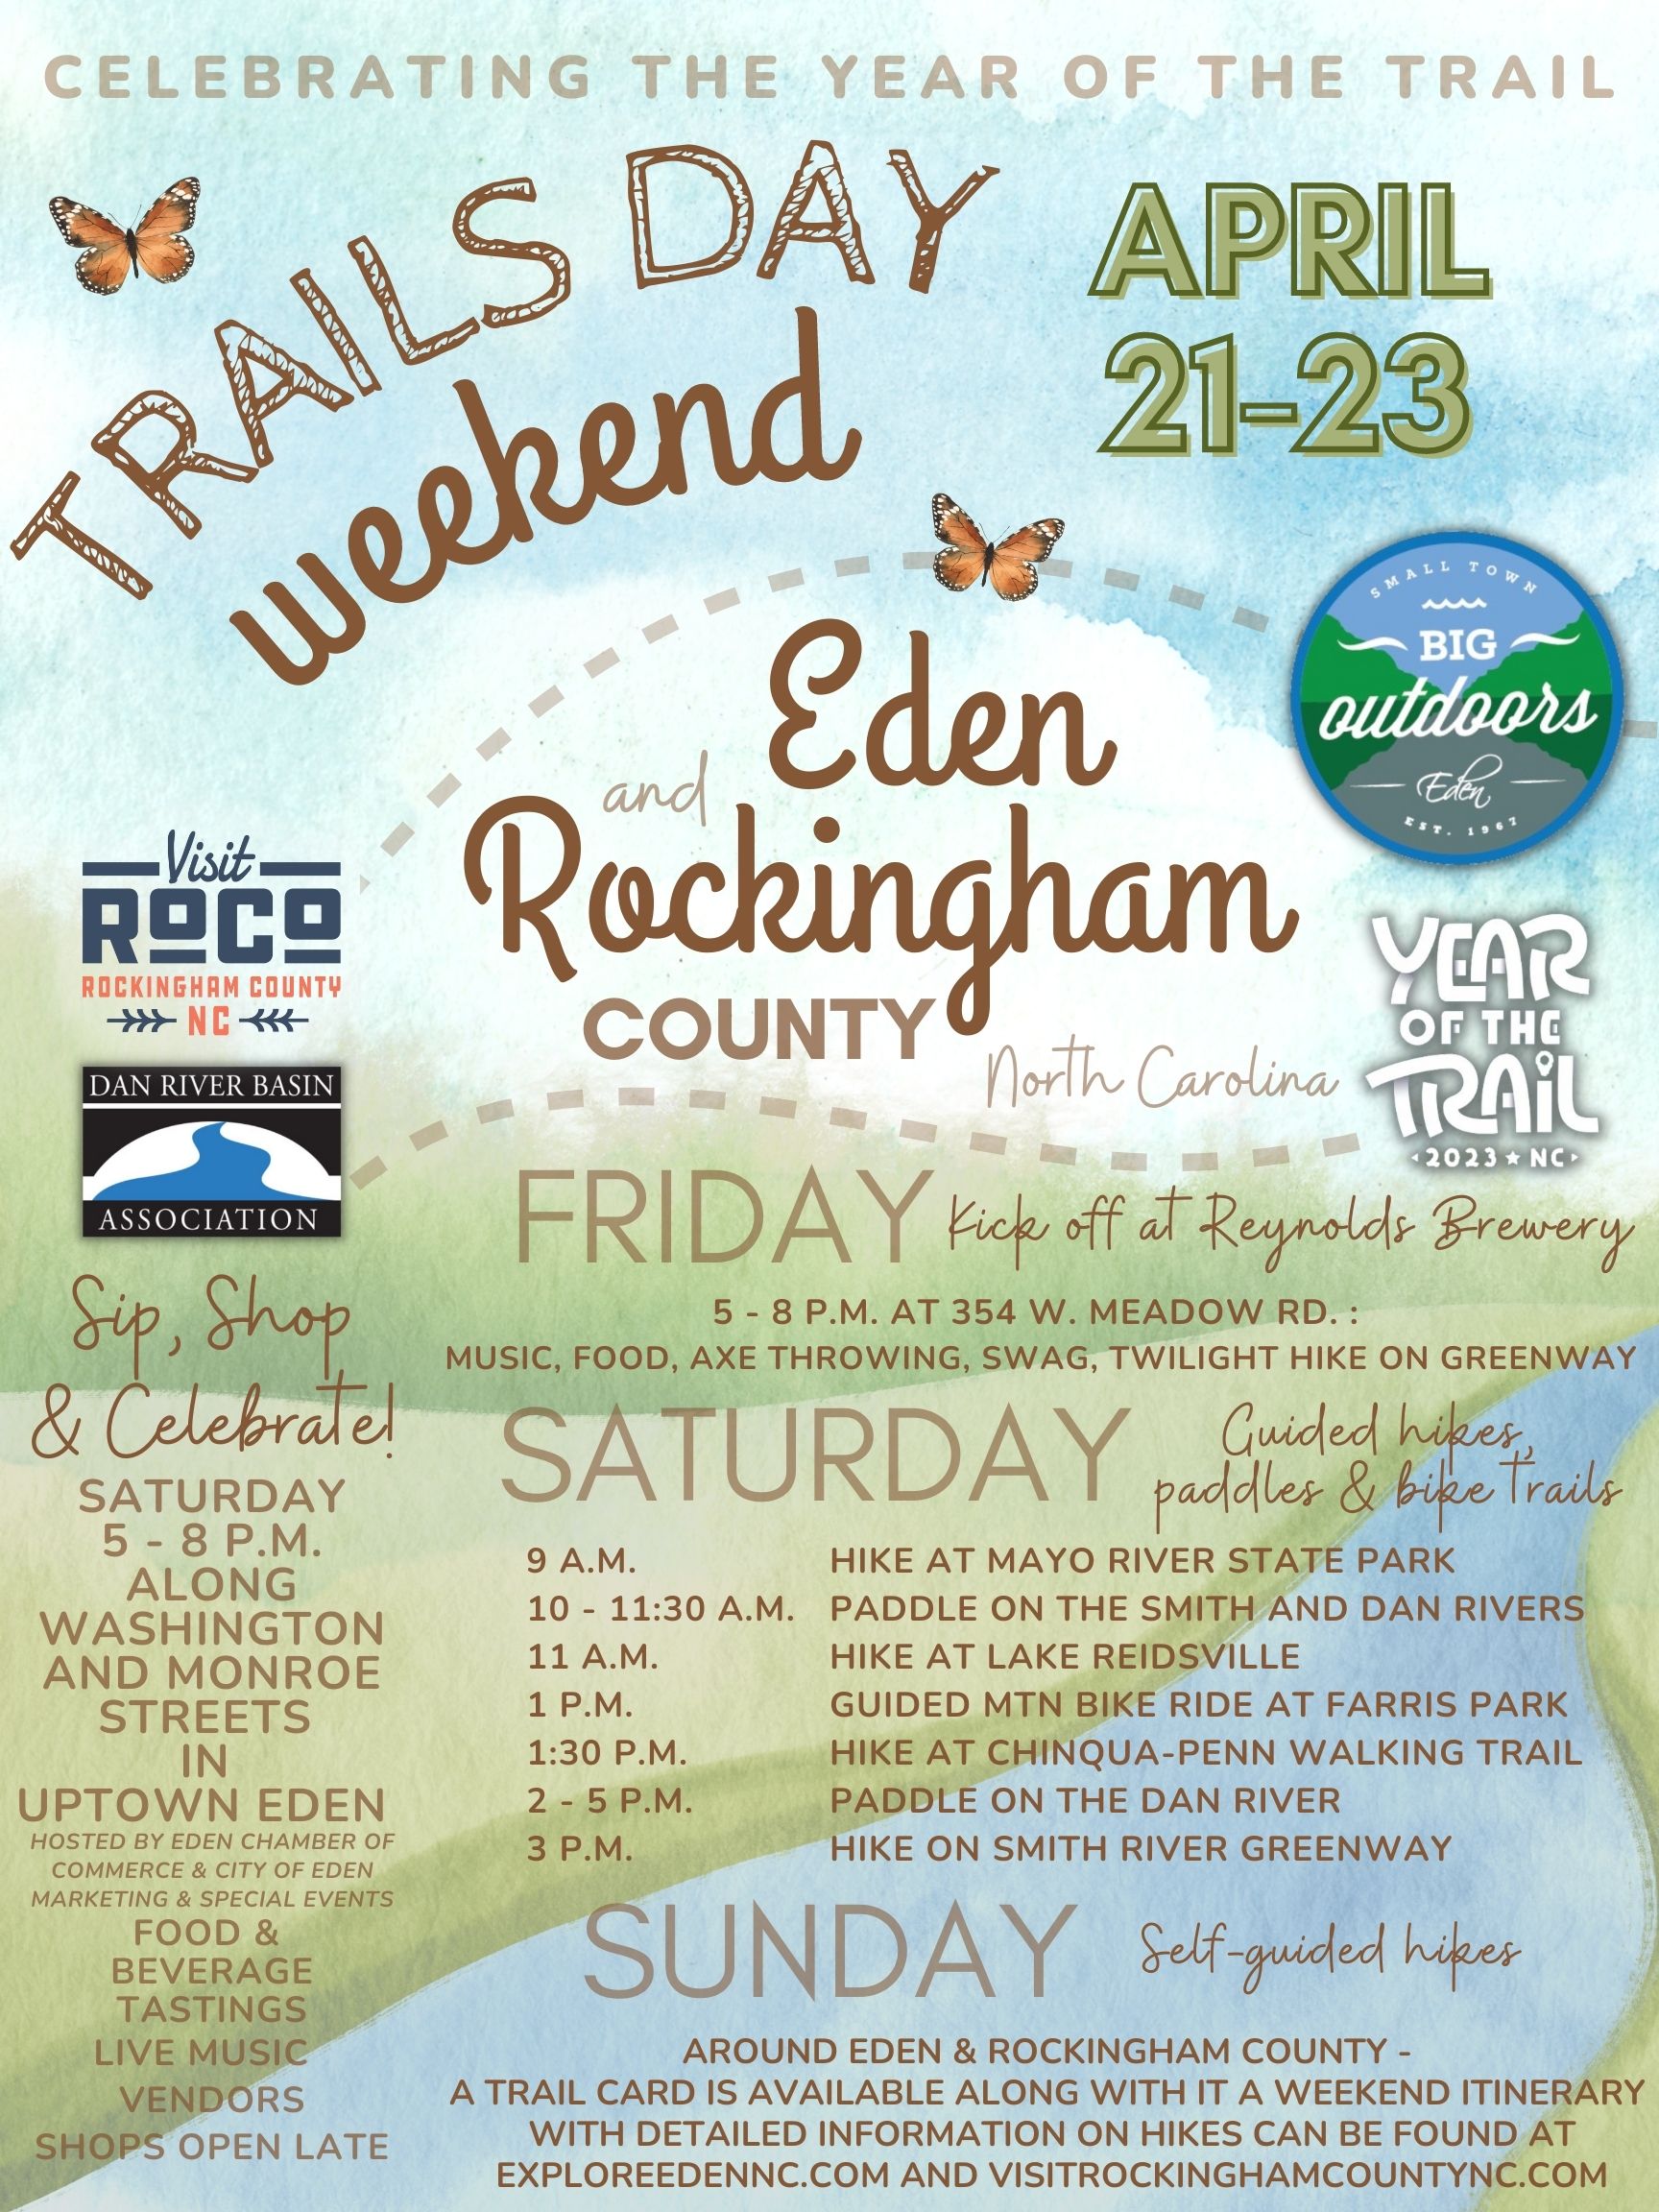 Trails Day Weekend flyer- information on the flyer is post in the text of this event